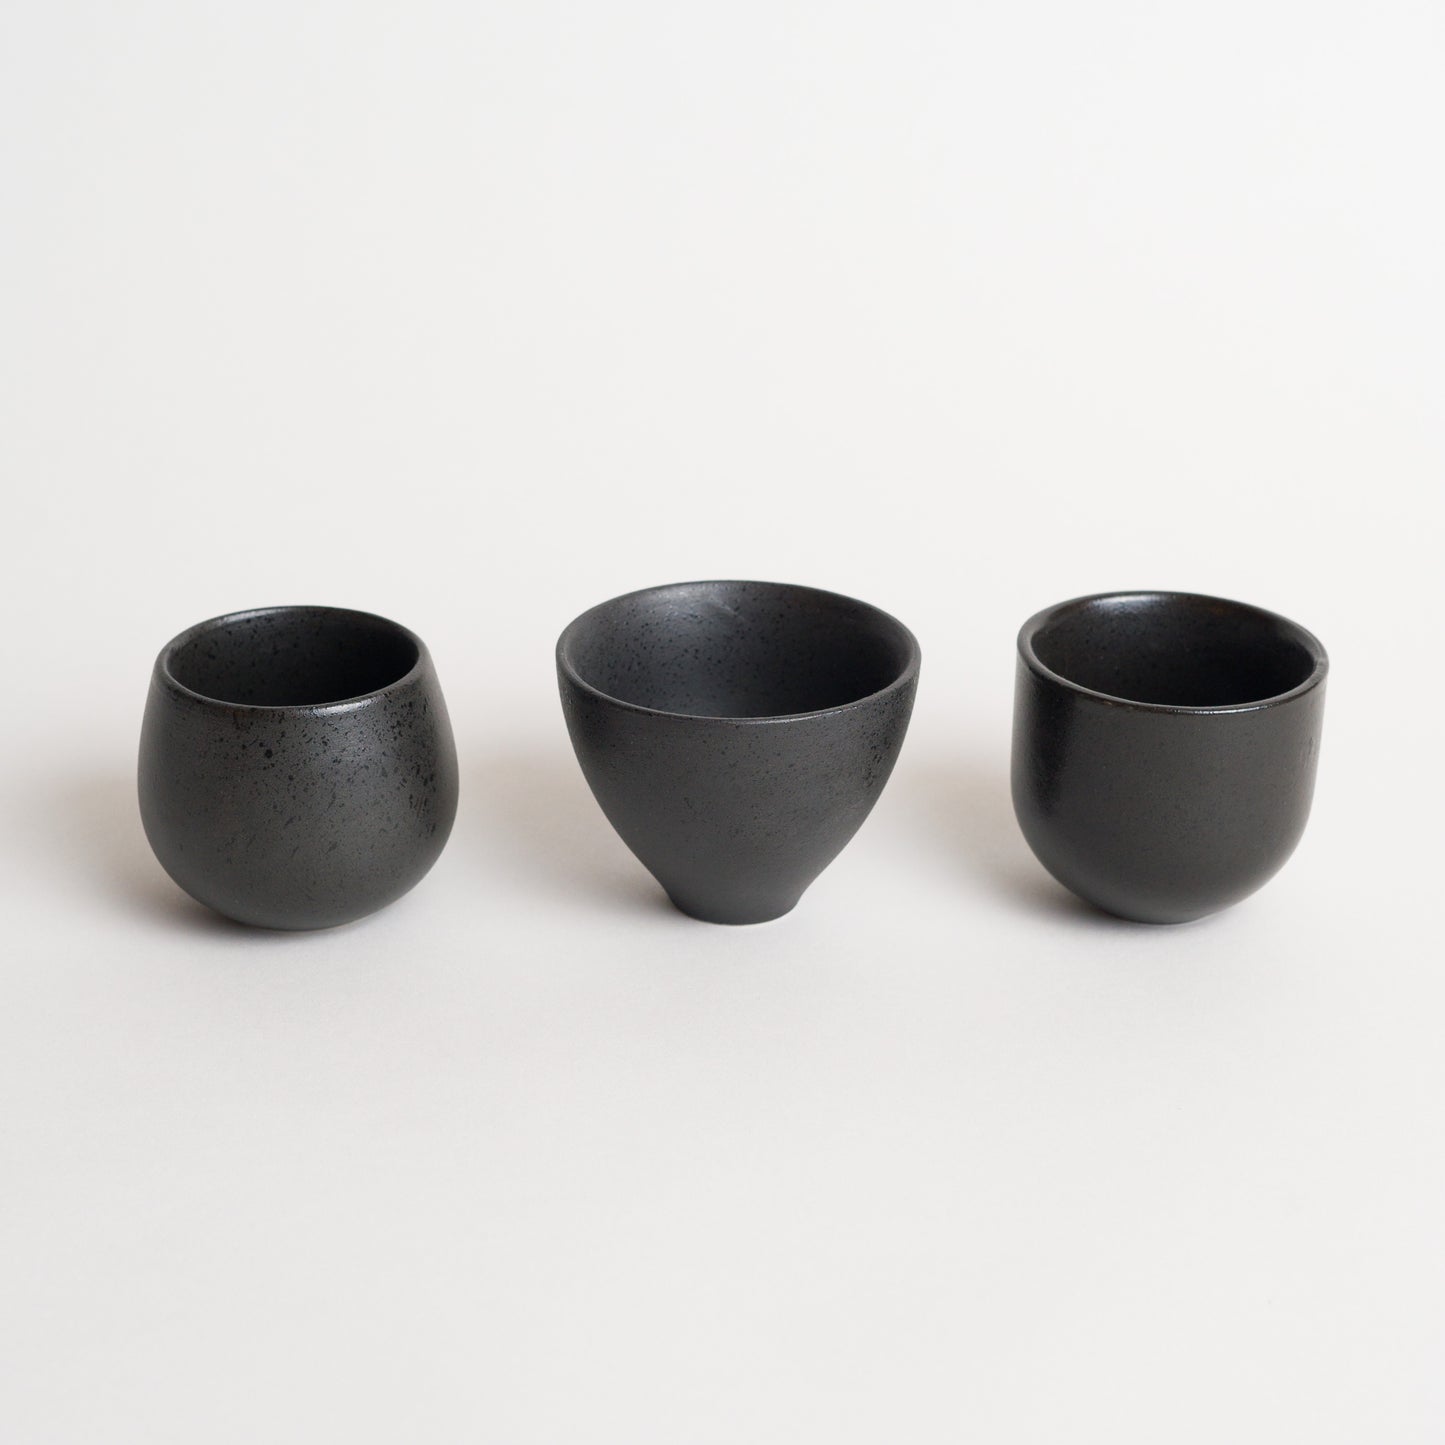 Hand made, pottery feel with texture. Specialty coffee, designer coffee cups. 3 shapes, Professional and home use. in Basalt